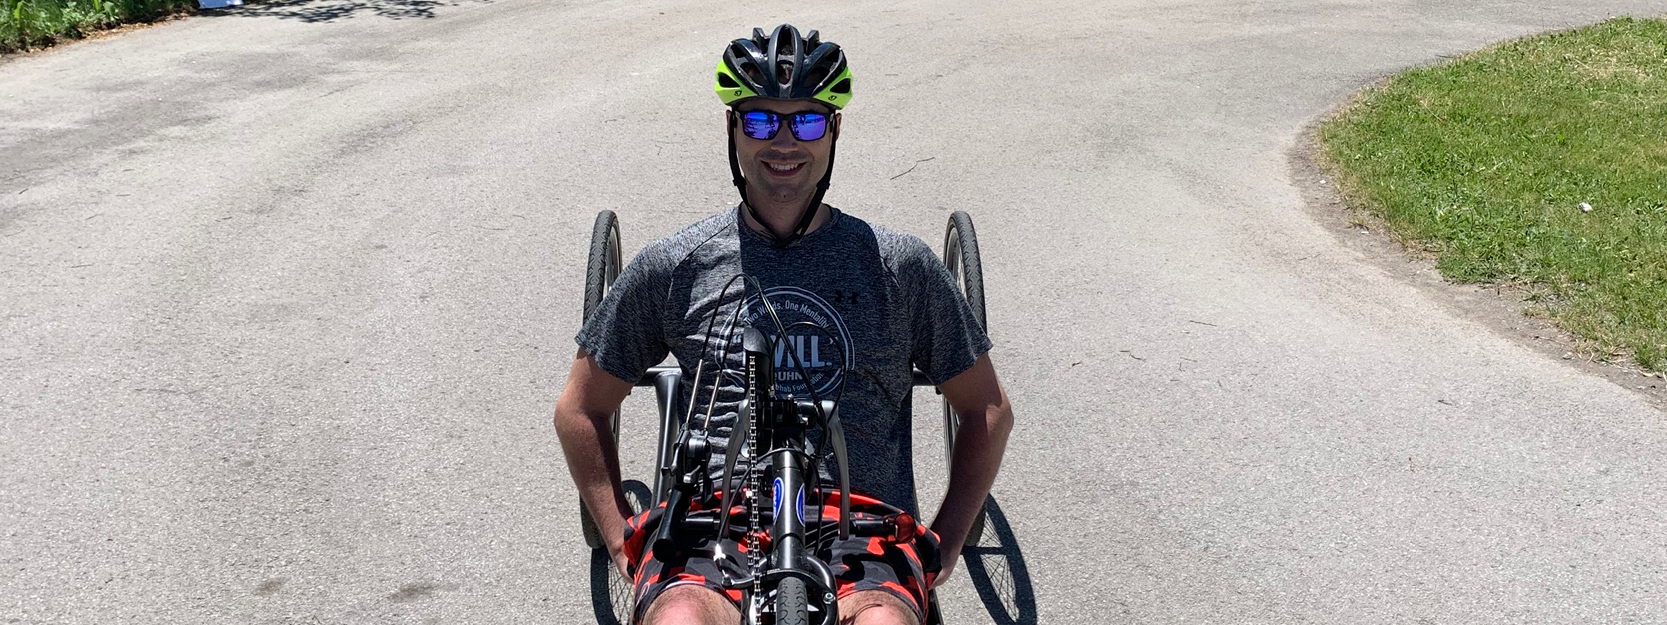 Nick Schoenhoff enjoying the accessible cycling pathways in his hometown of Oakville, Ontario.